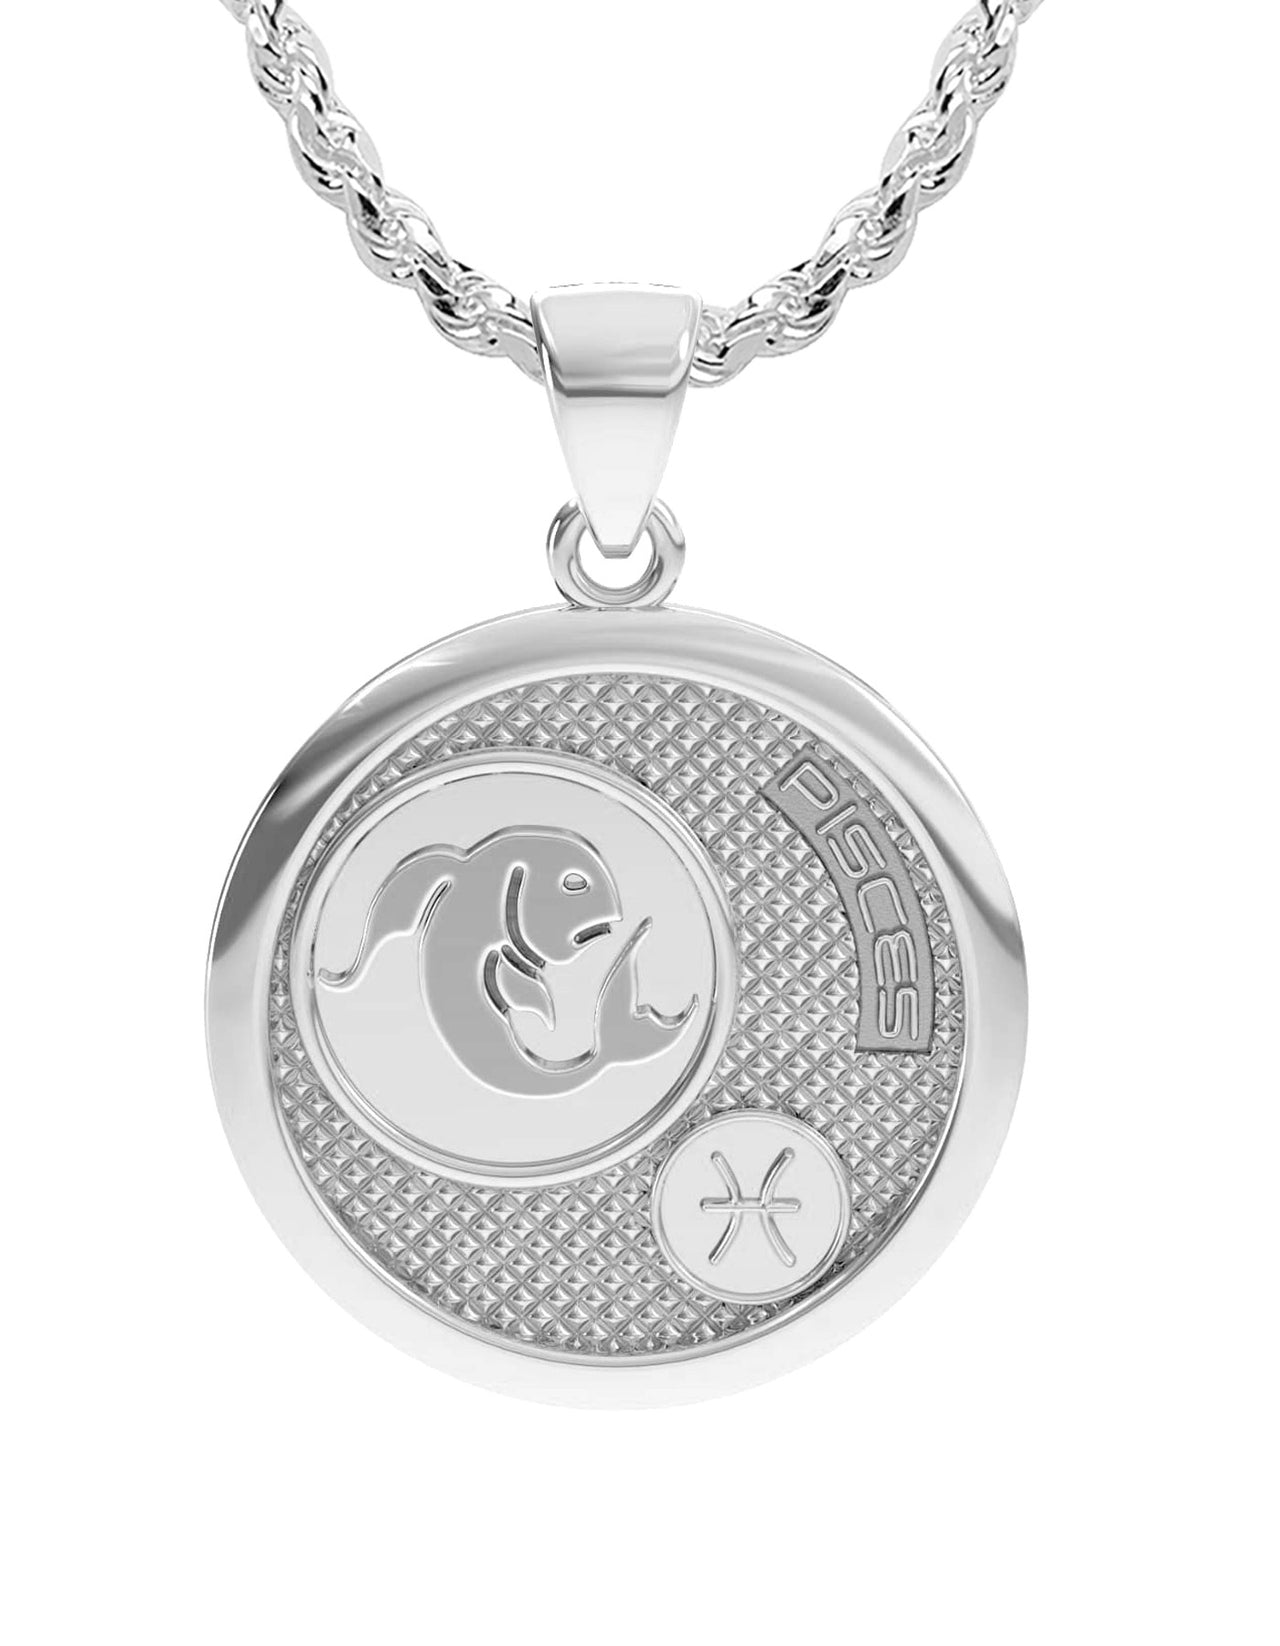 Ladies 925 Sterling Silver Round Pisces Zodiac Polished Finish Pendant Necklace, 25mm